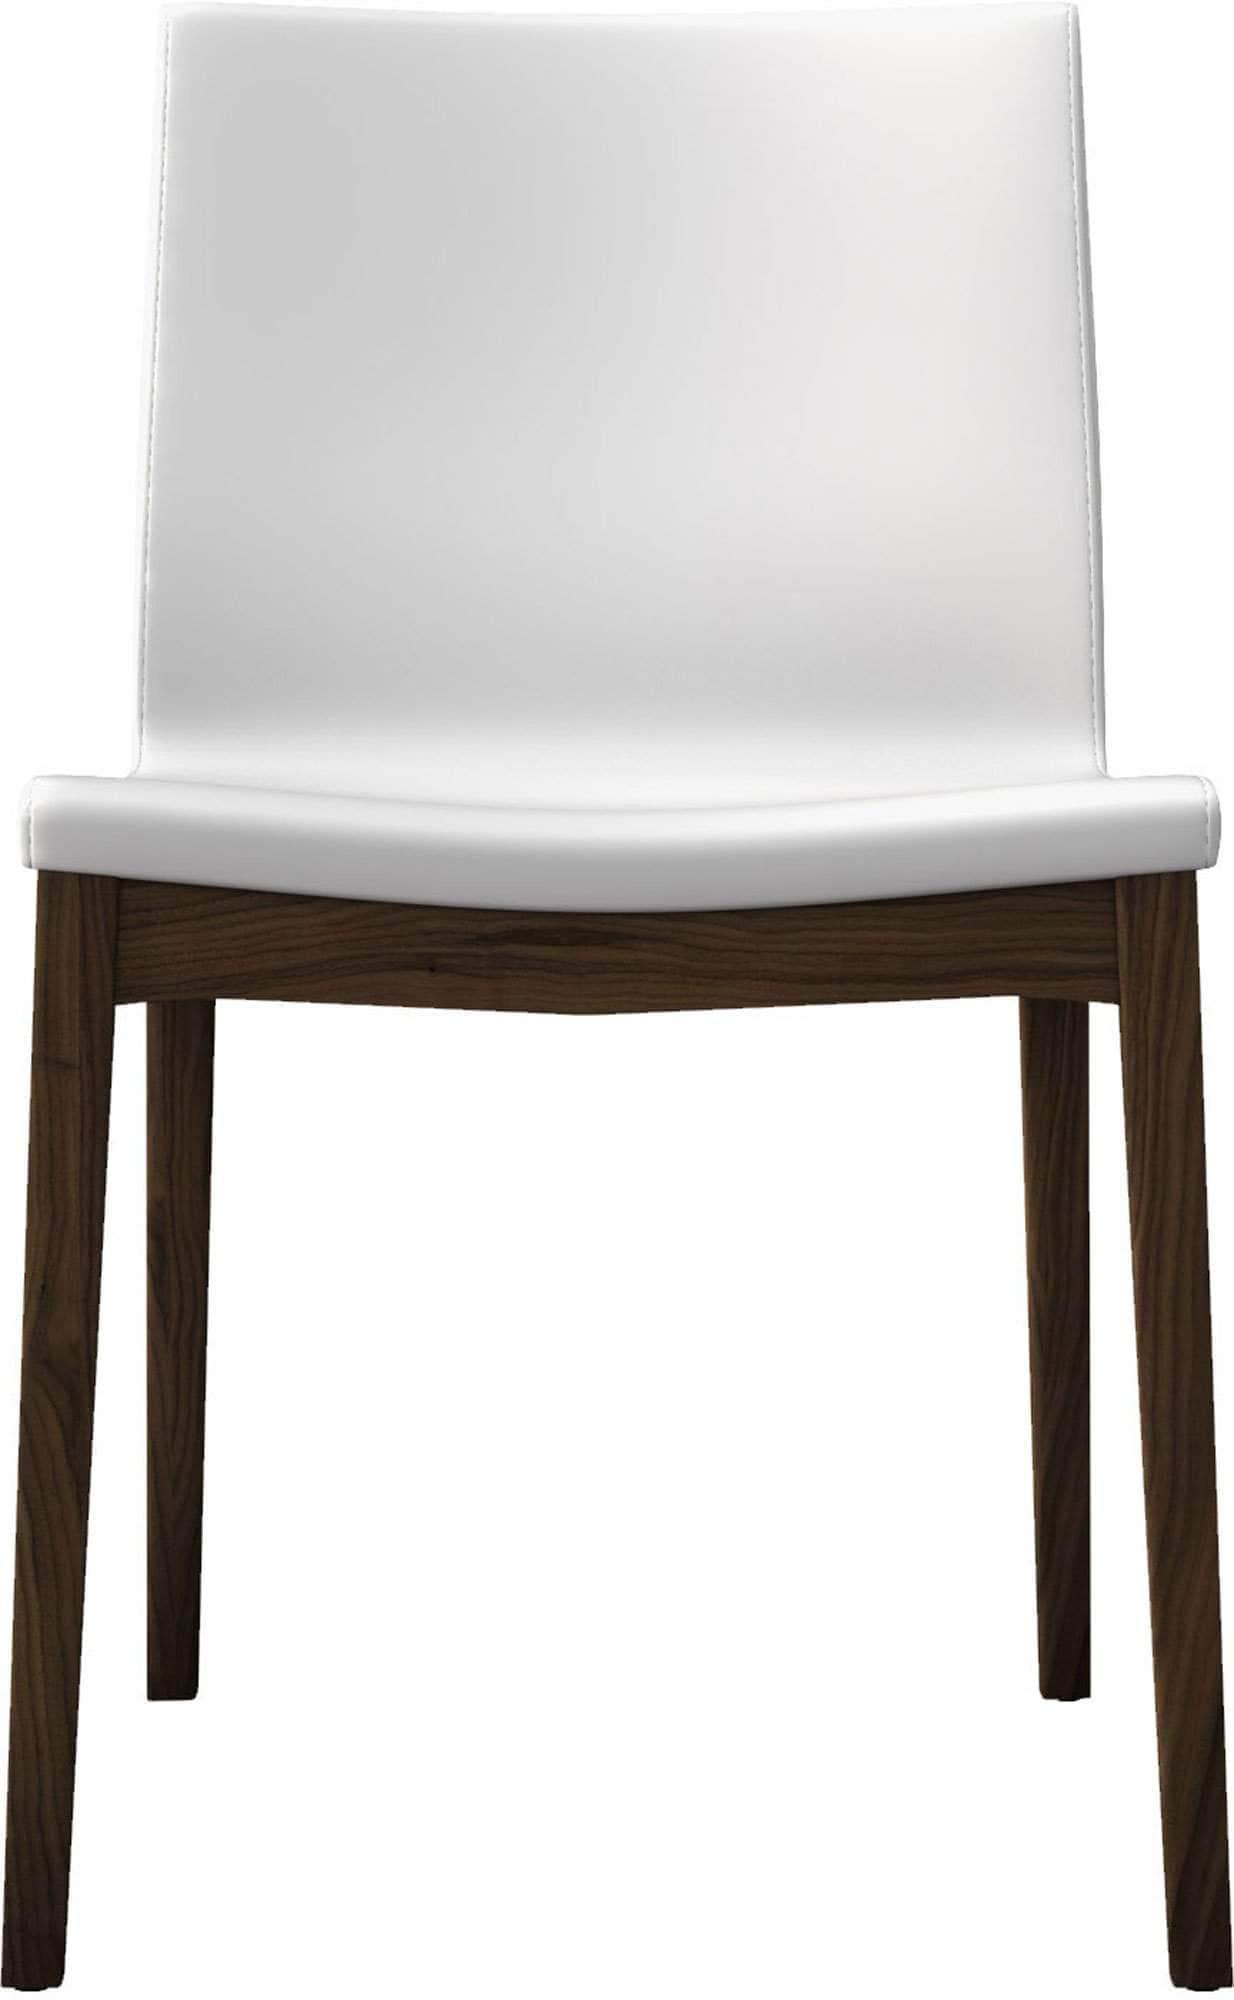 Modloft Dining Chair White Eco Leather/Canaletto Walnut Enna Italian-Made Eco Pelle Leather Dining Chair (Set of 2) - Available in 2 Colours